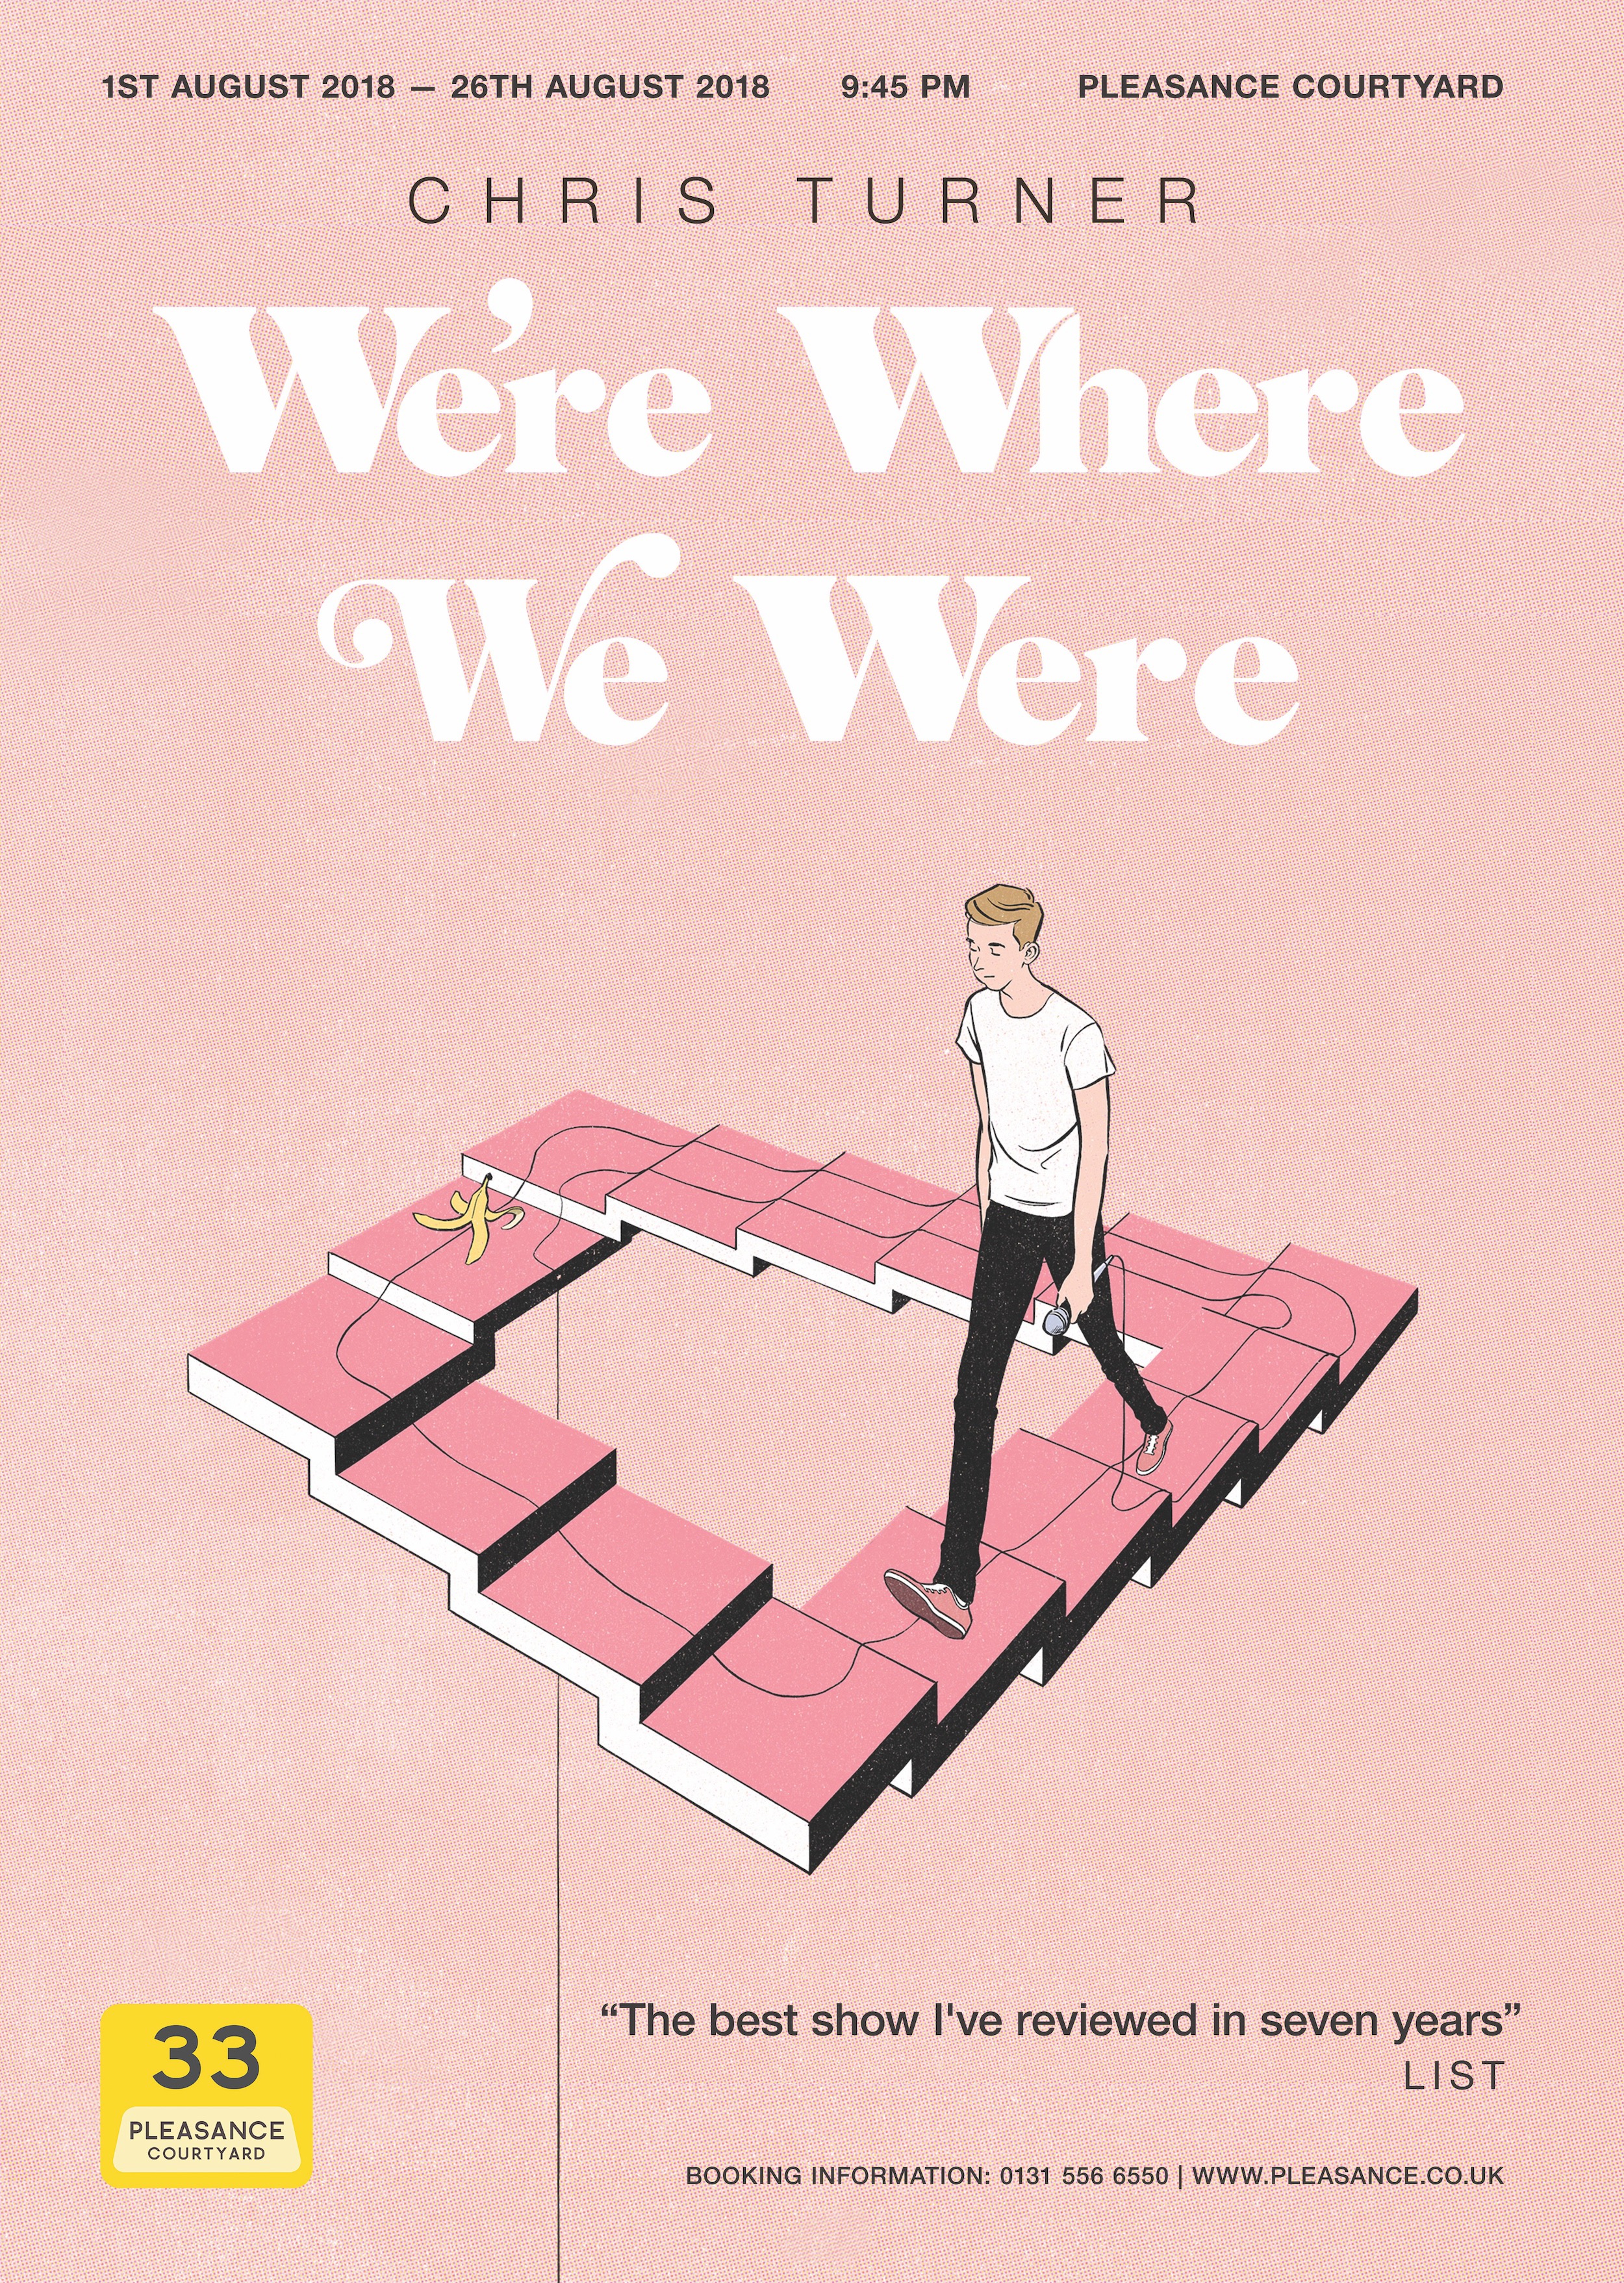 The poster for Chris Turner: We're Where We Were